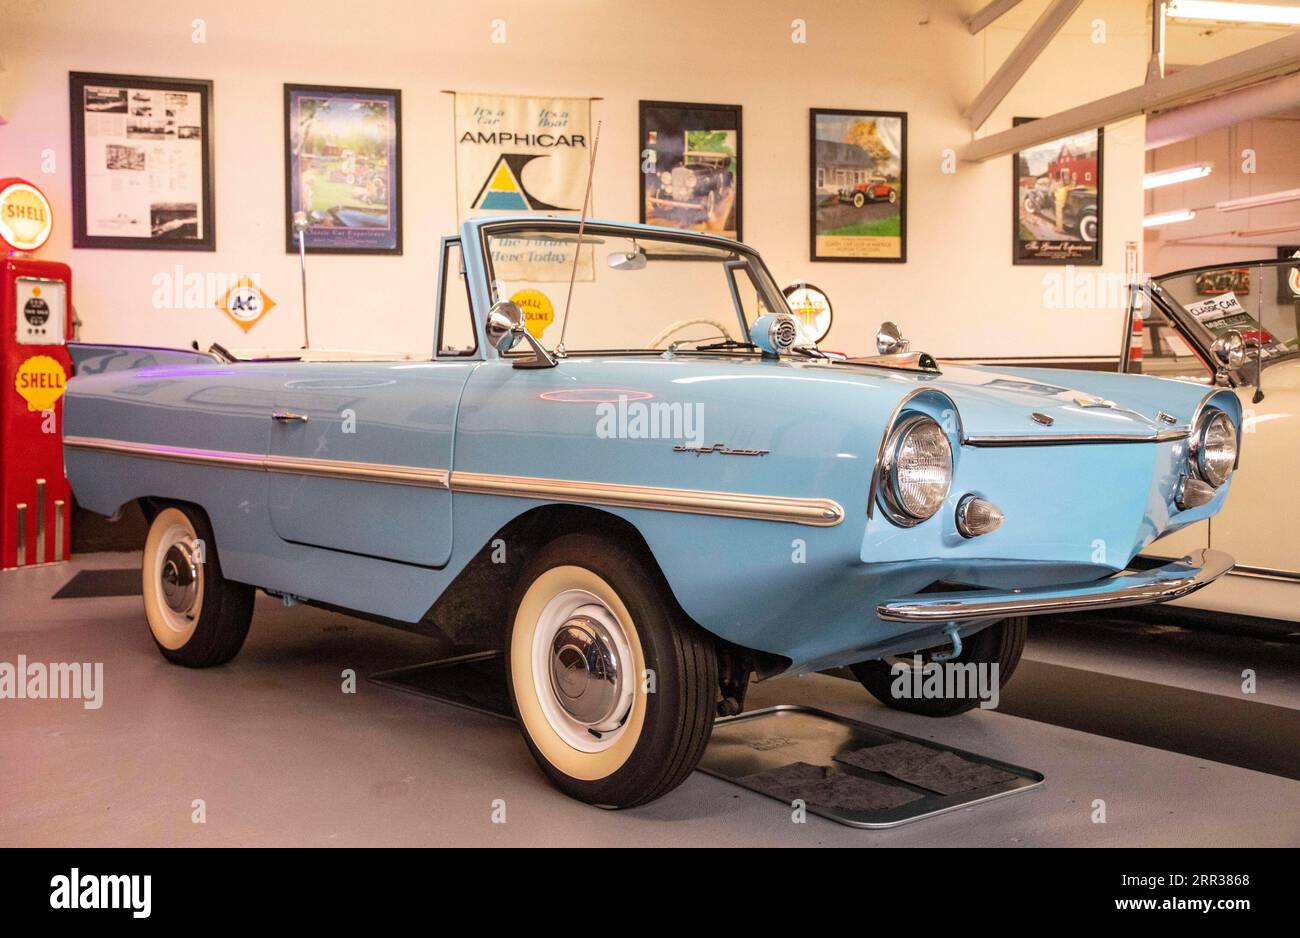 201026 -- CHICAGO, Oct. 26, 2020 -- A 1964 Amphicar 770 Convertible is seen at Klairmont Kollections in Chicago, Illinois, the United States, on Oct. 25, 2020. Klairmont Kollections is a private car collection museum with an assemblage of over 300 vehicles. Photo by /Xinhua U.S.-CHICAGO-KLAIRMONT KOLLECTIONS JoelxLerner PUBLICATIONxNOTxINxCHN Stock Photo